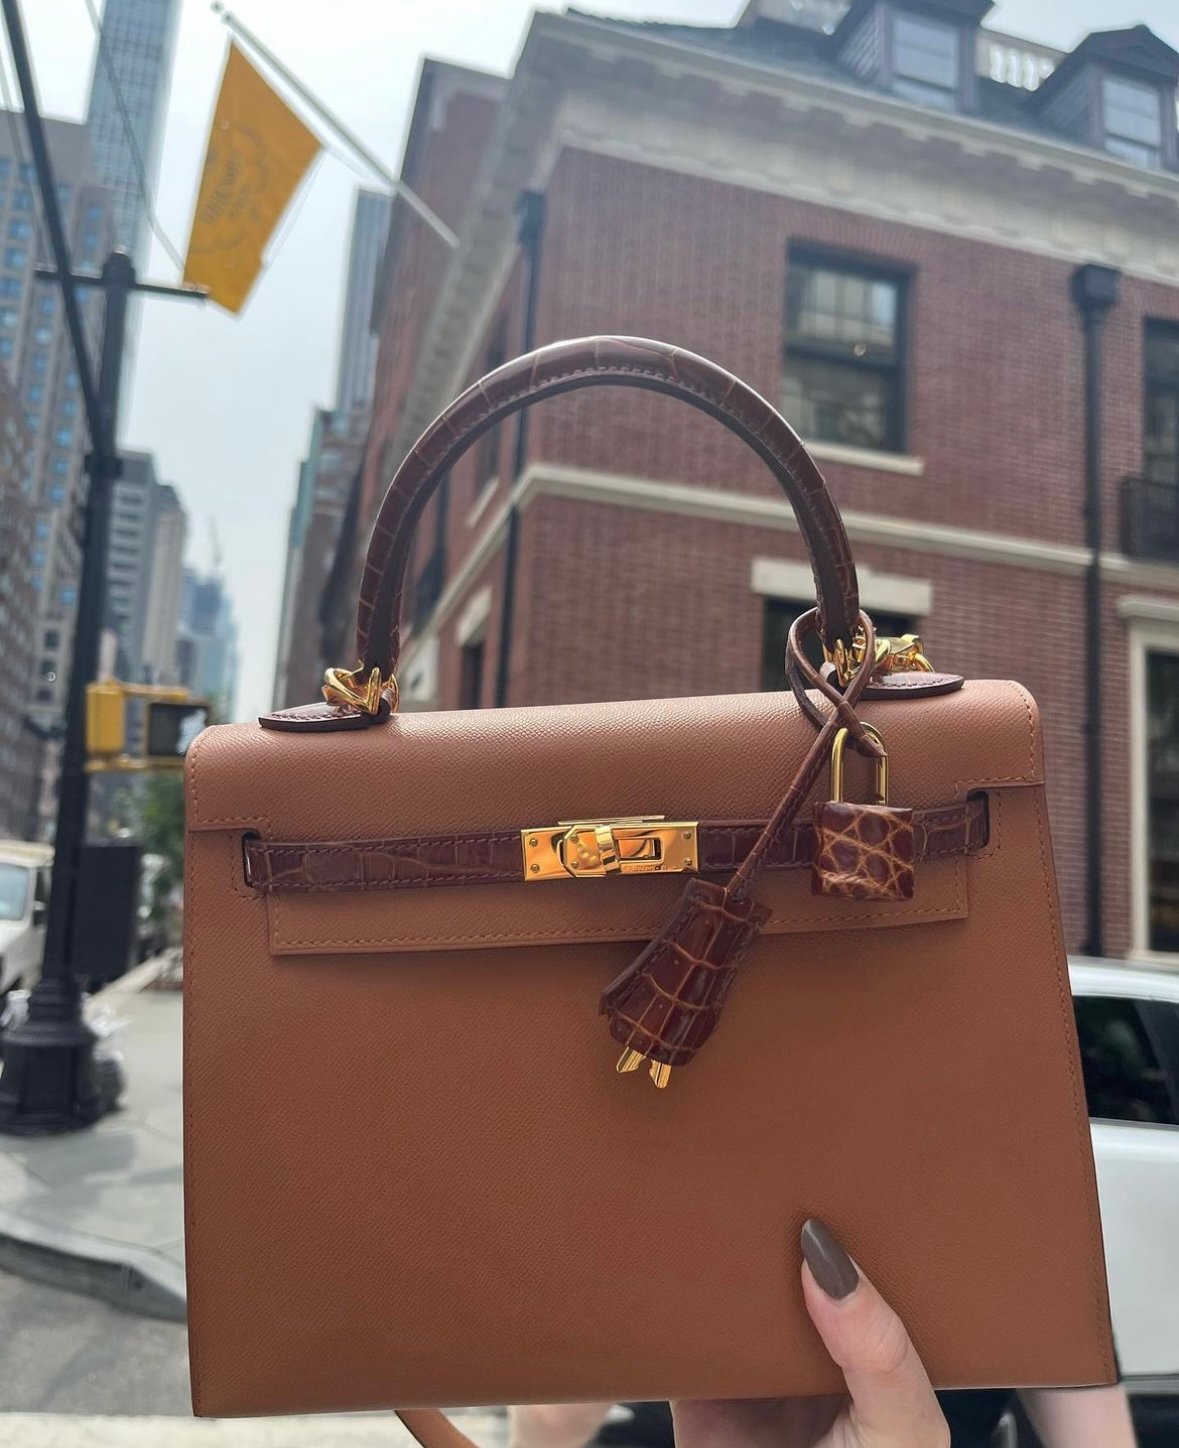 Internet Feels This Tiny Hermes Bag Is A 'Waste Of Money' - News18